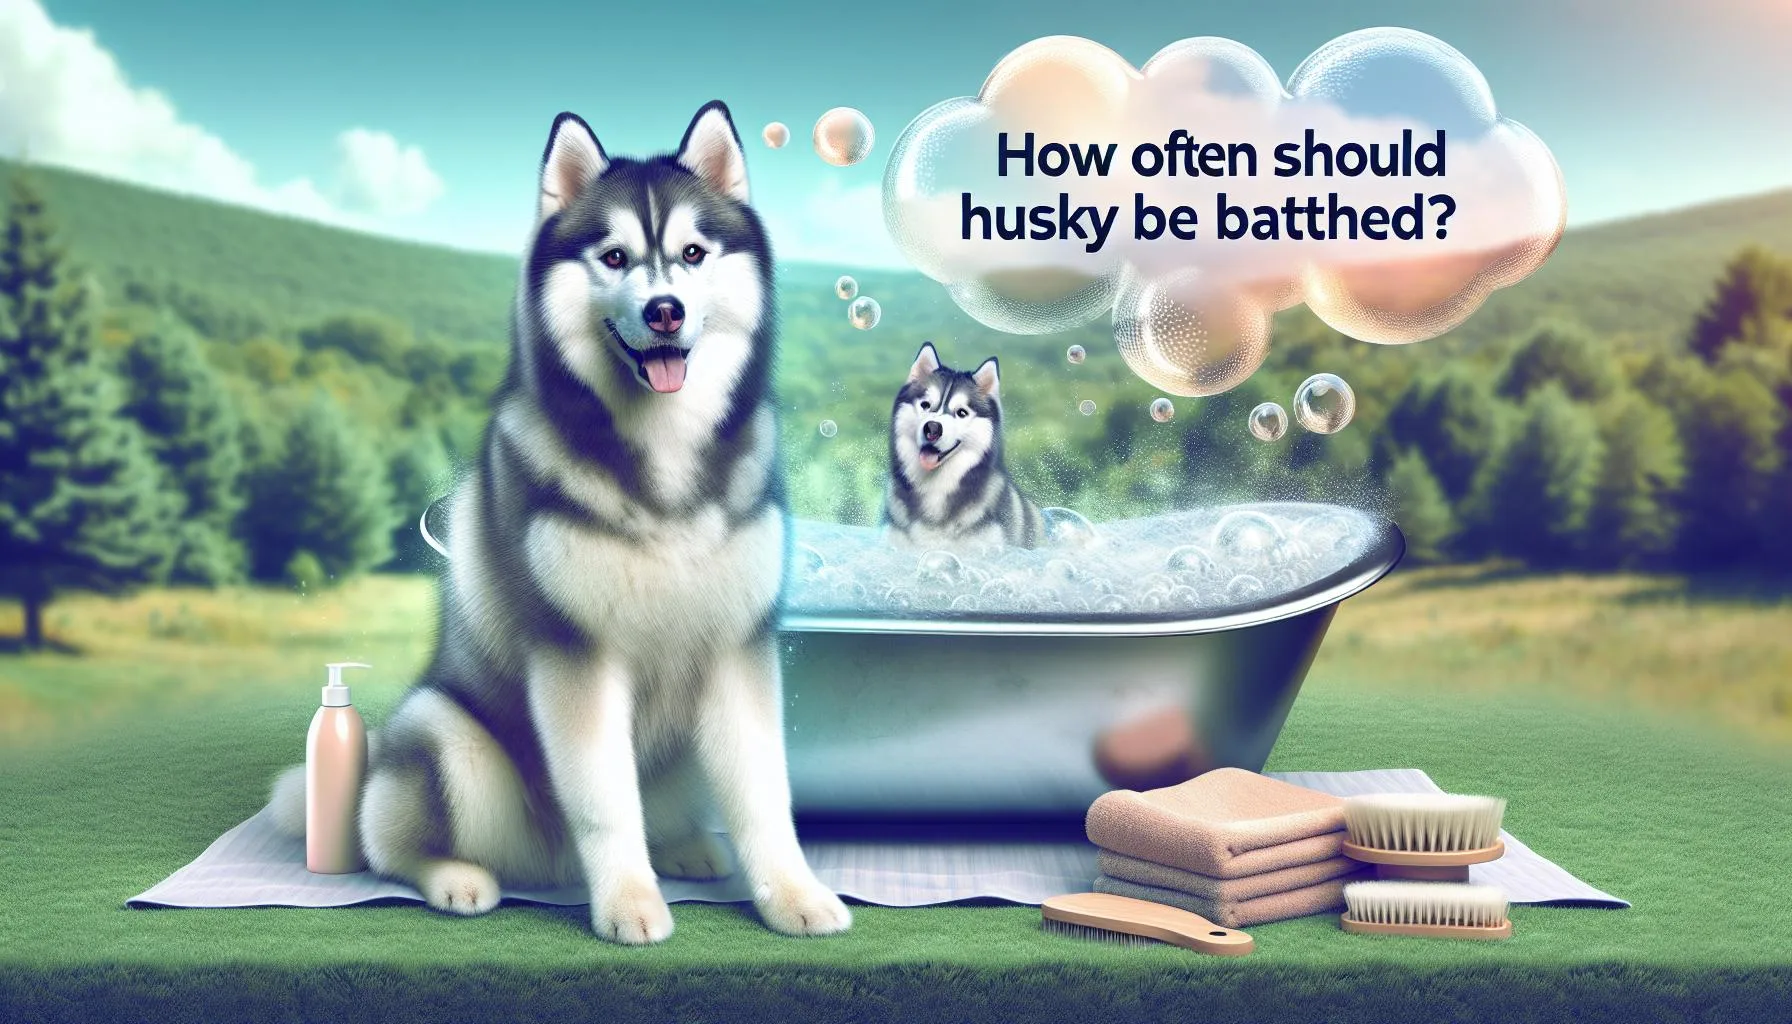 How Often Should a Husky Be Bathed? Top Tips Inside!